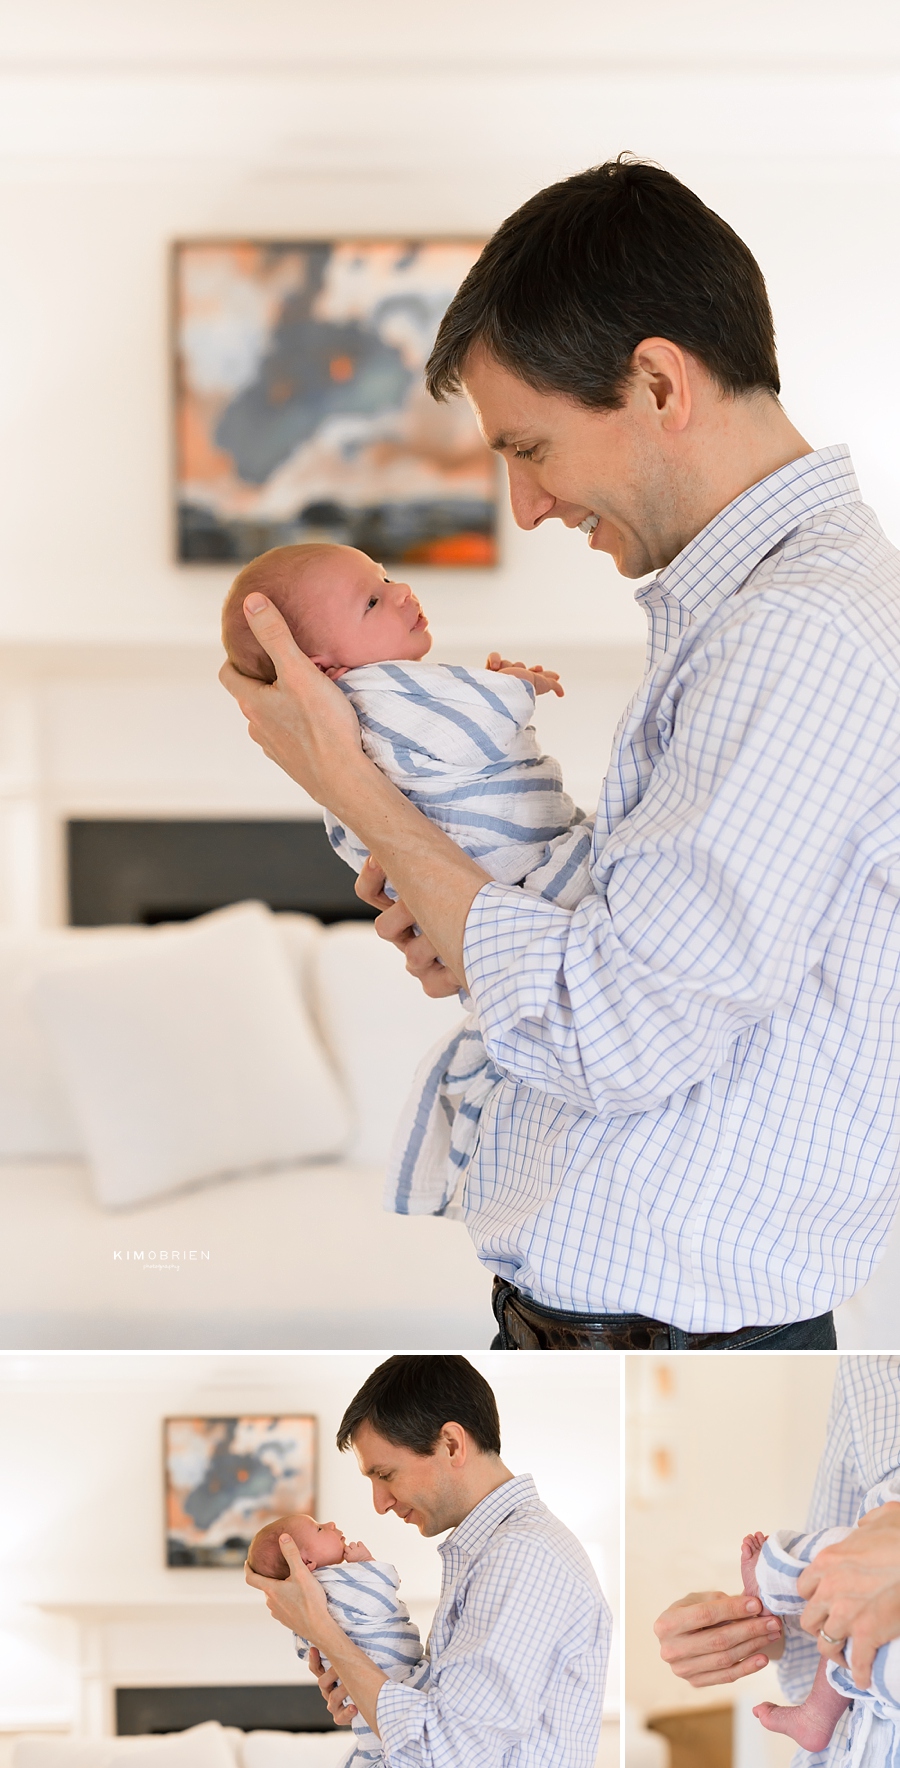 Baby Andrew ~ lifestyle newborn family session